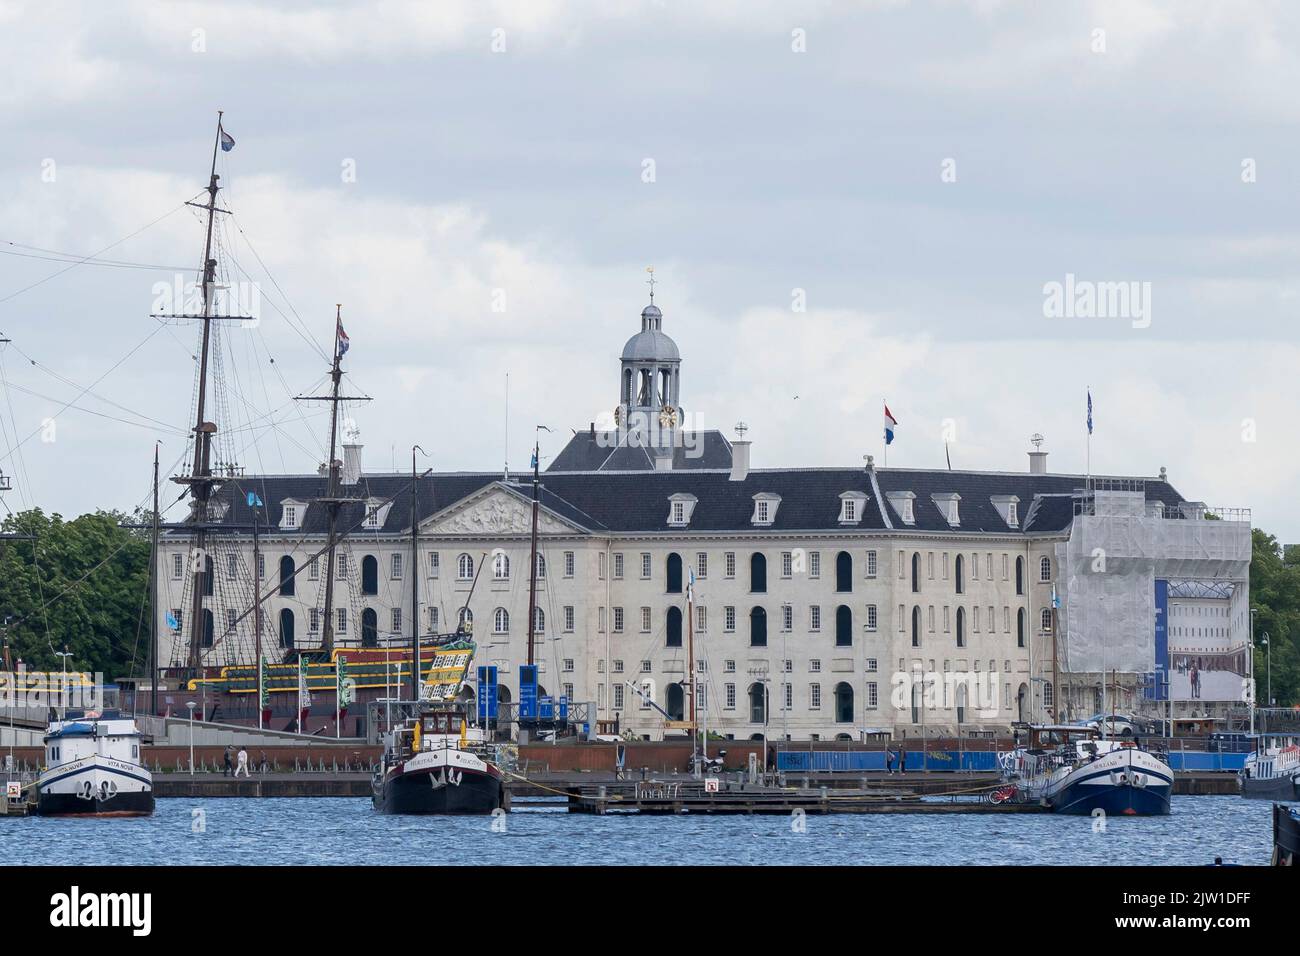 A general view of the the Het Scheepvaartmuseum (National Maritime Museum) in Amsterdam, Holland. Stock Photo